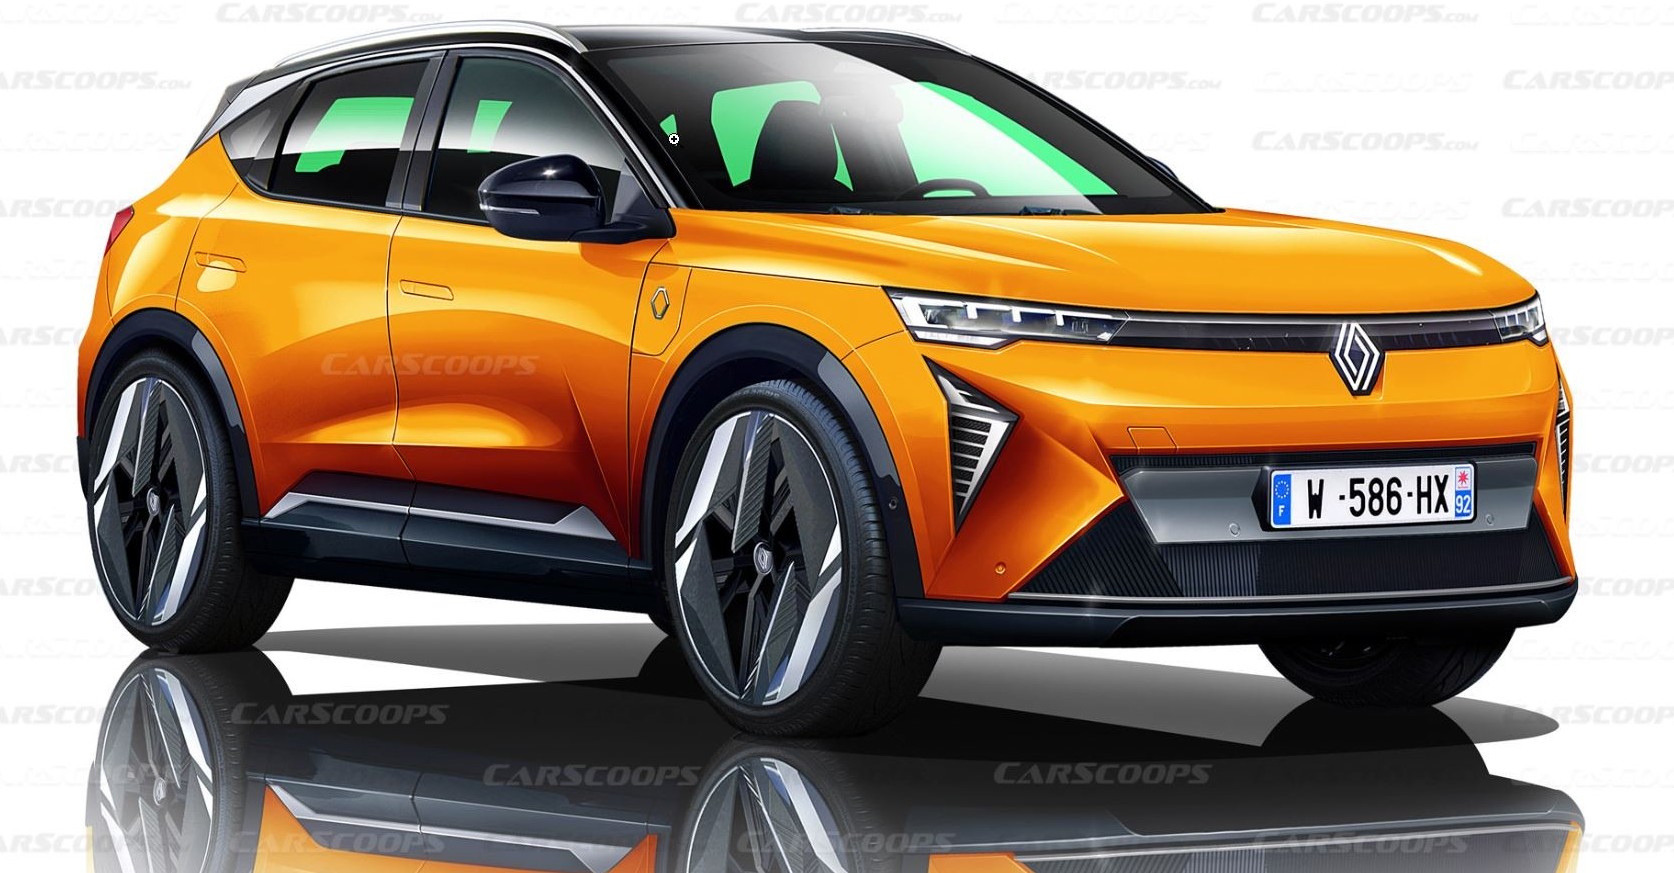 The new Renault Scenic 2023-2024 brings many important changes to the SUV that will be shown in September